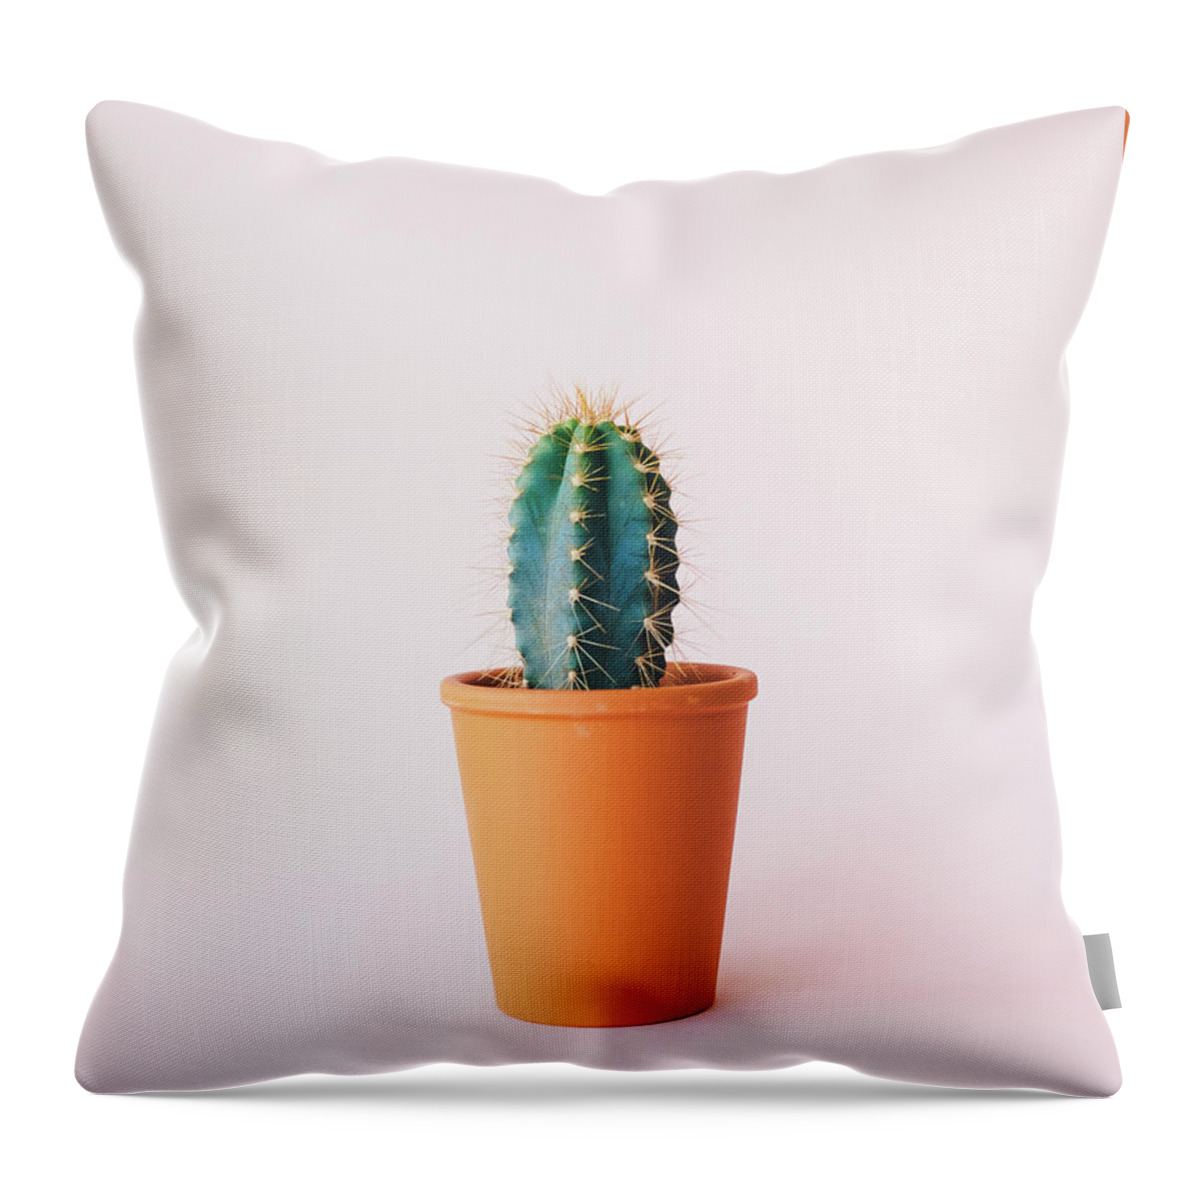 Cactus Throw Pillow featuring the photograph Cactus Pot by Happy Home Artistry